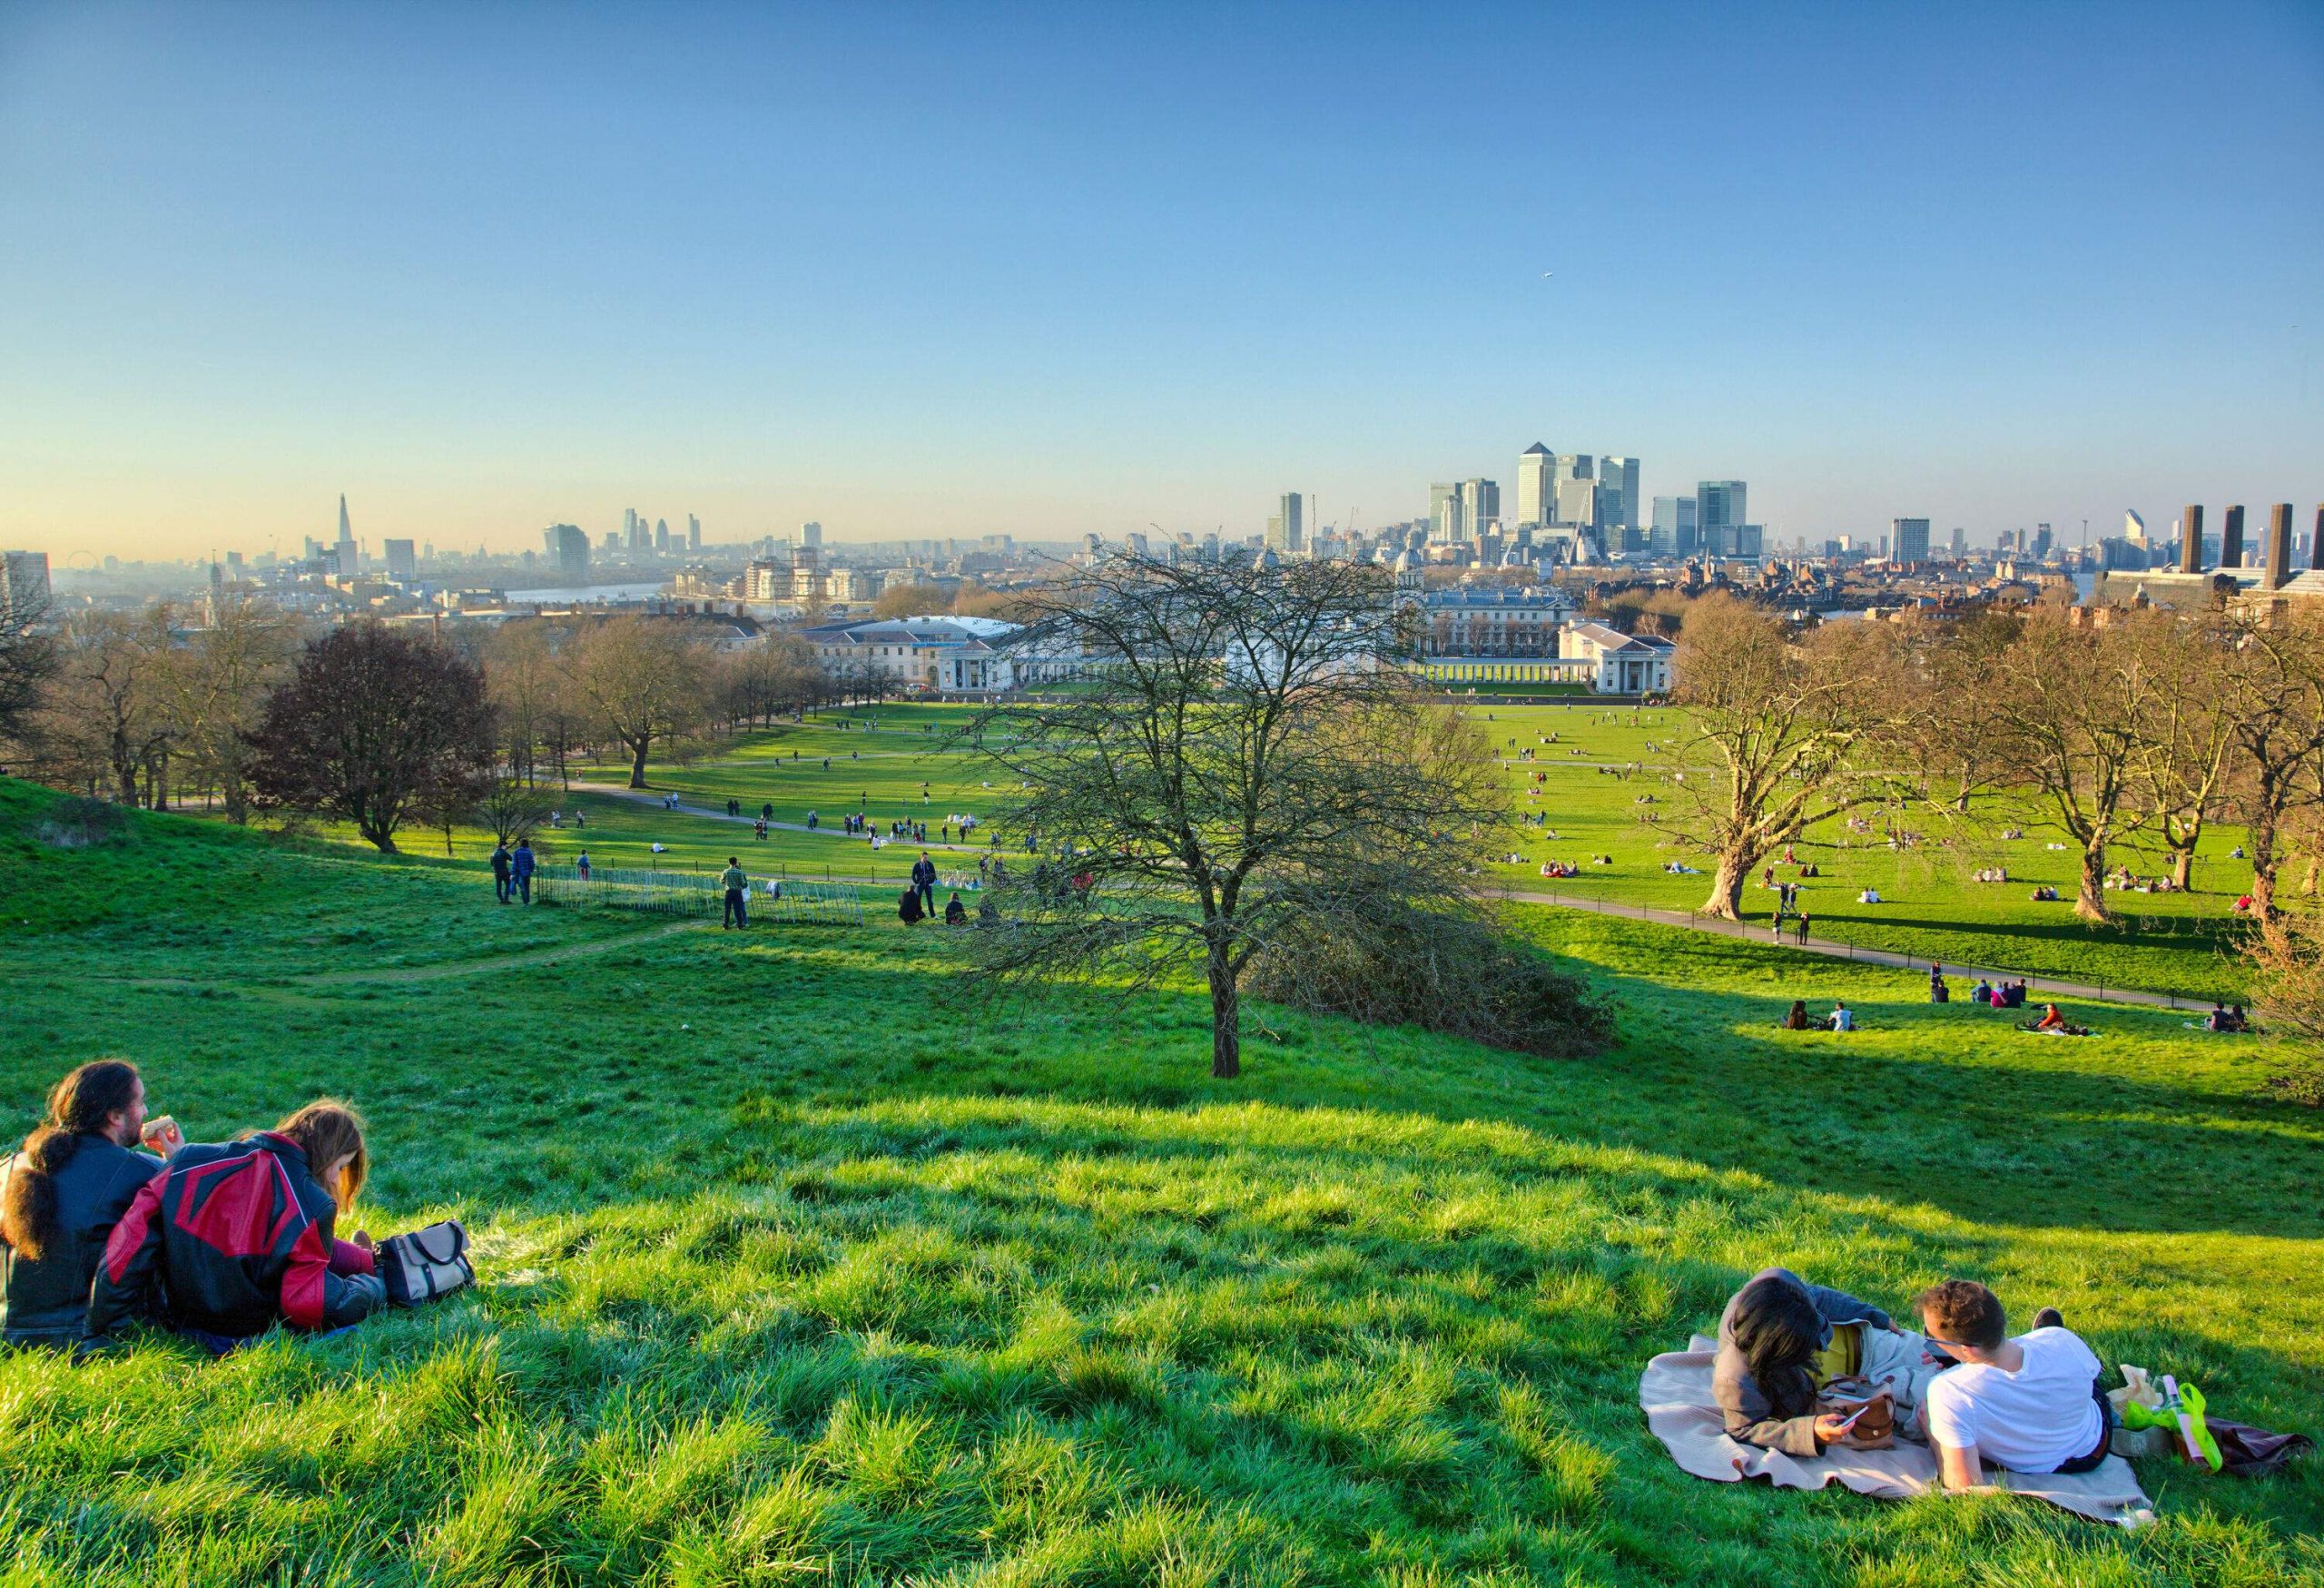 People relax on a grassy slope in a park with distant views of the metropolitan skyline.